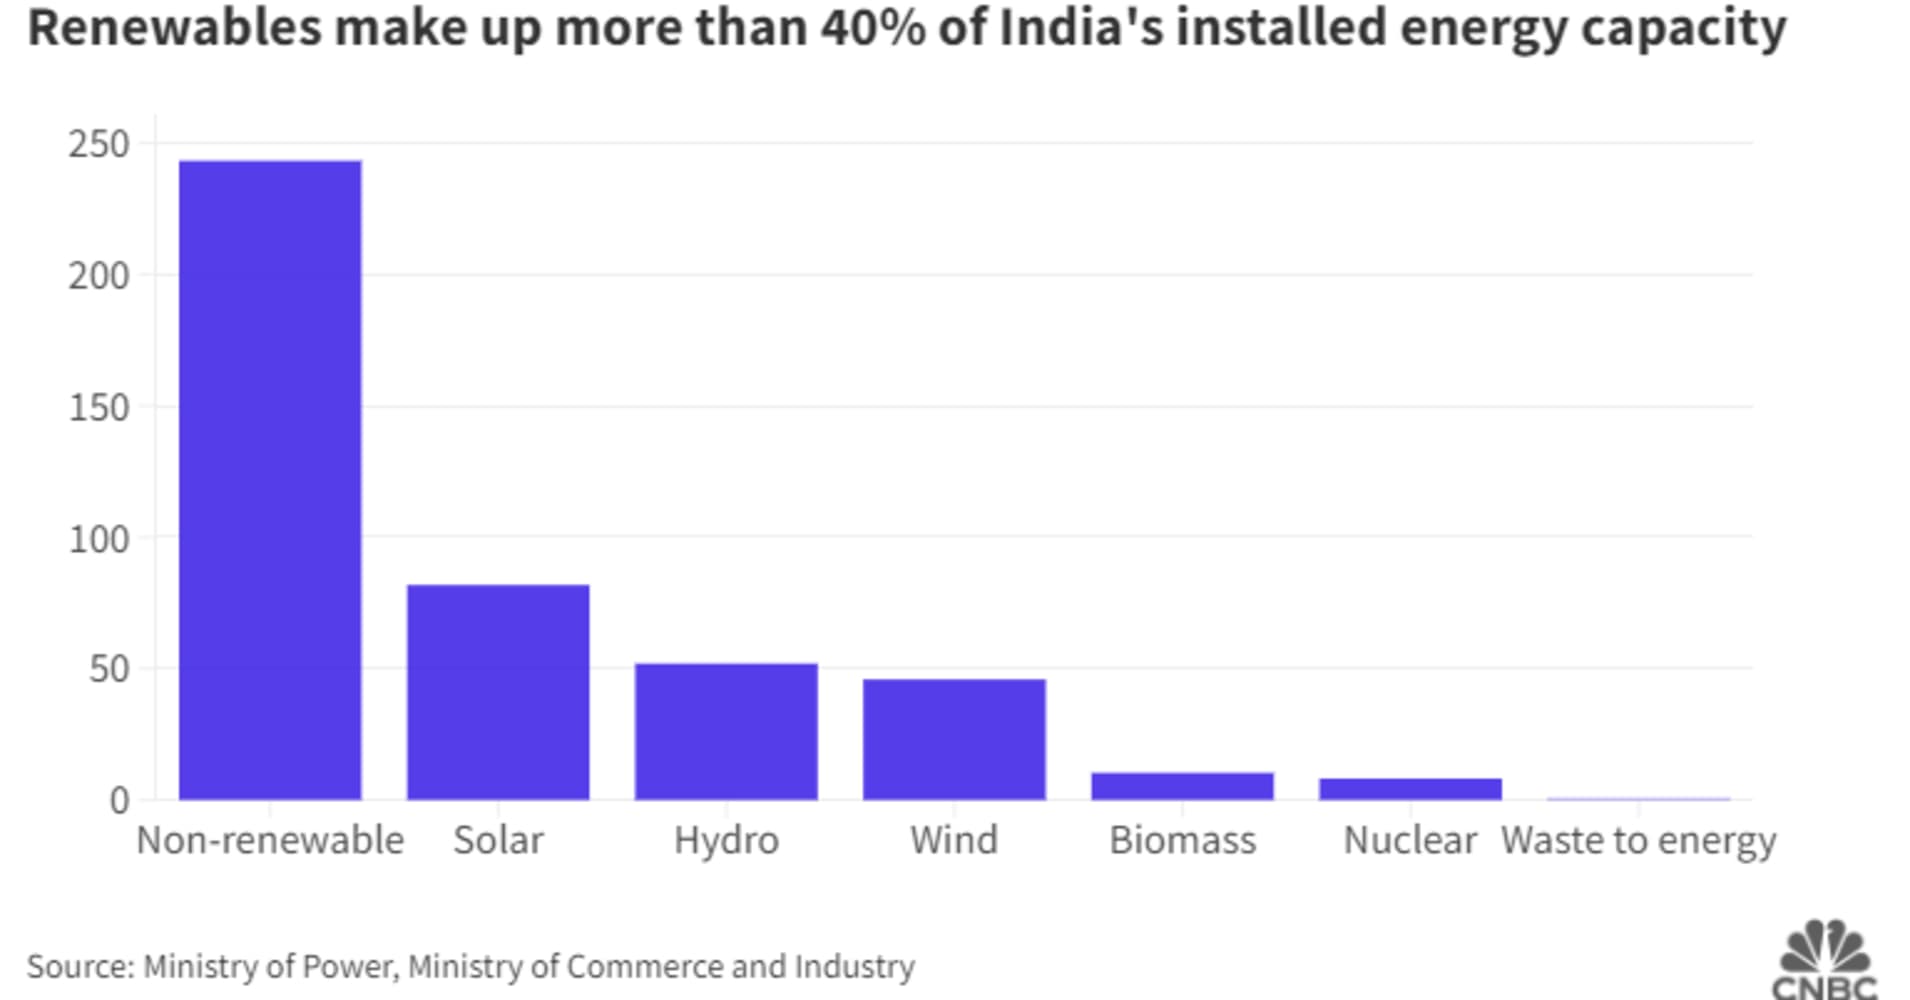 cnbc's inside india newsletter: a $270 billion gamble on green?